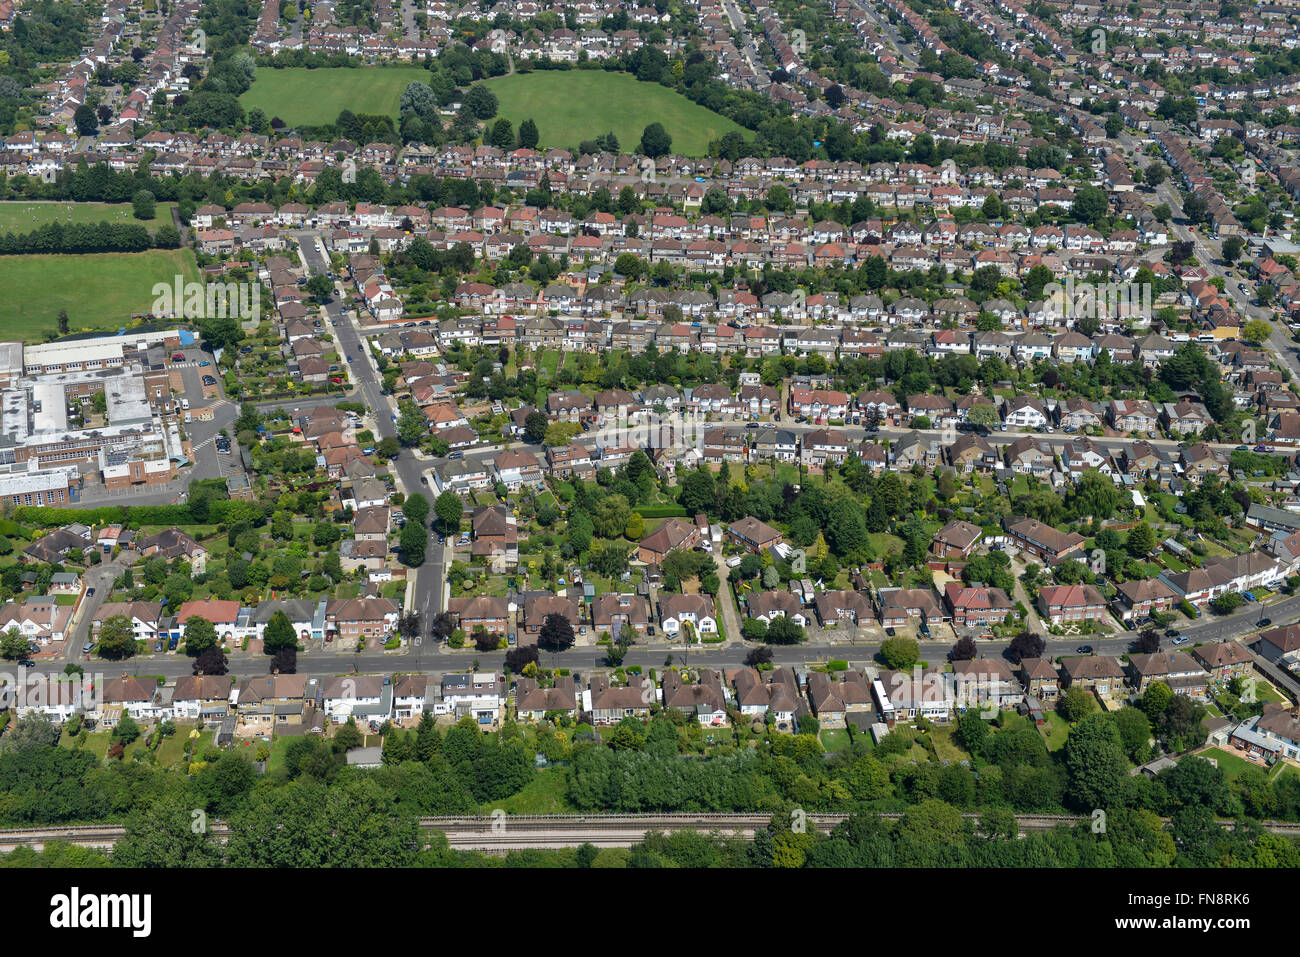 An aerial view of typical English suburban housing Stock Photo